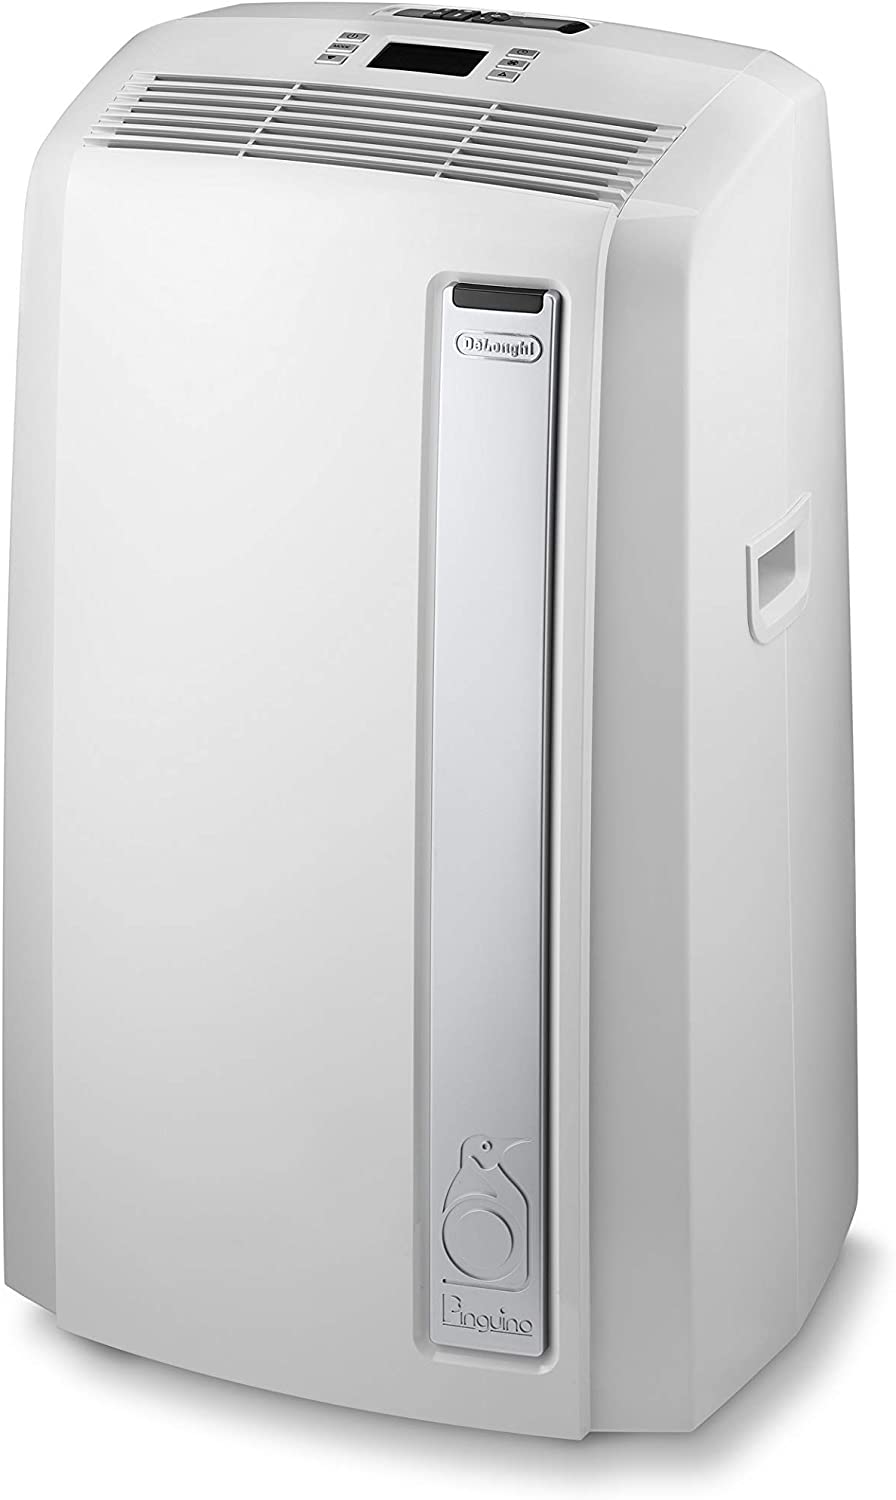 Delonghi Pinguino Pac Ank Silent Portable Air Conditioner Reviews And Comments